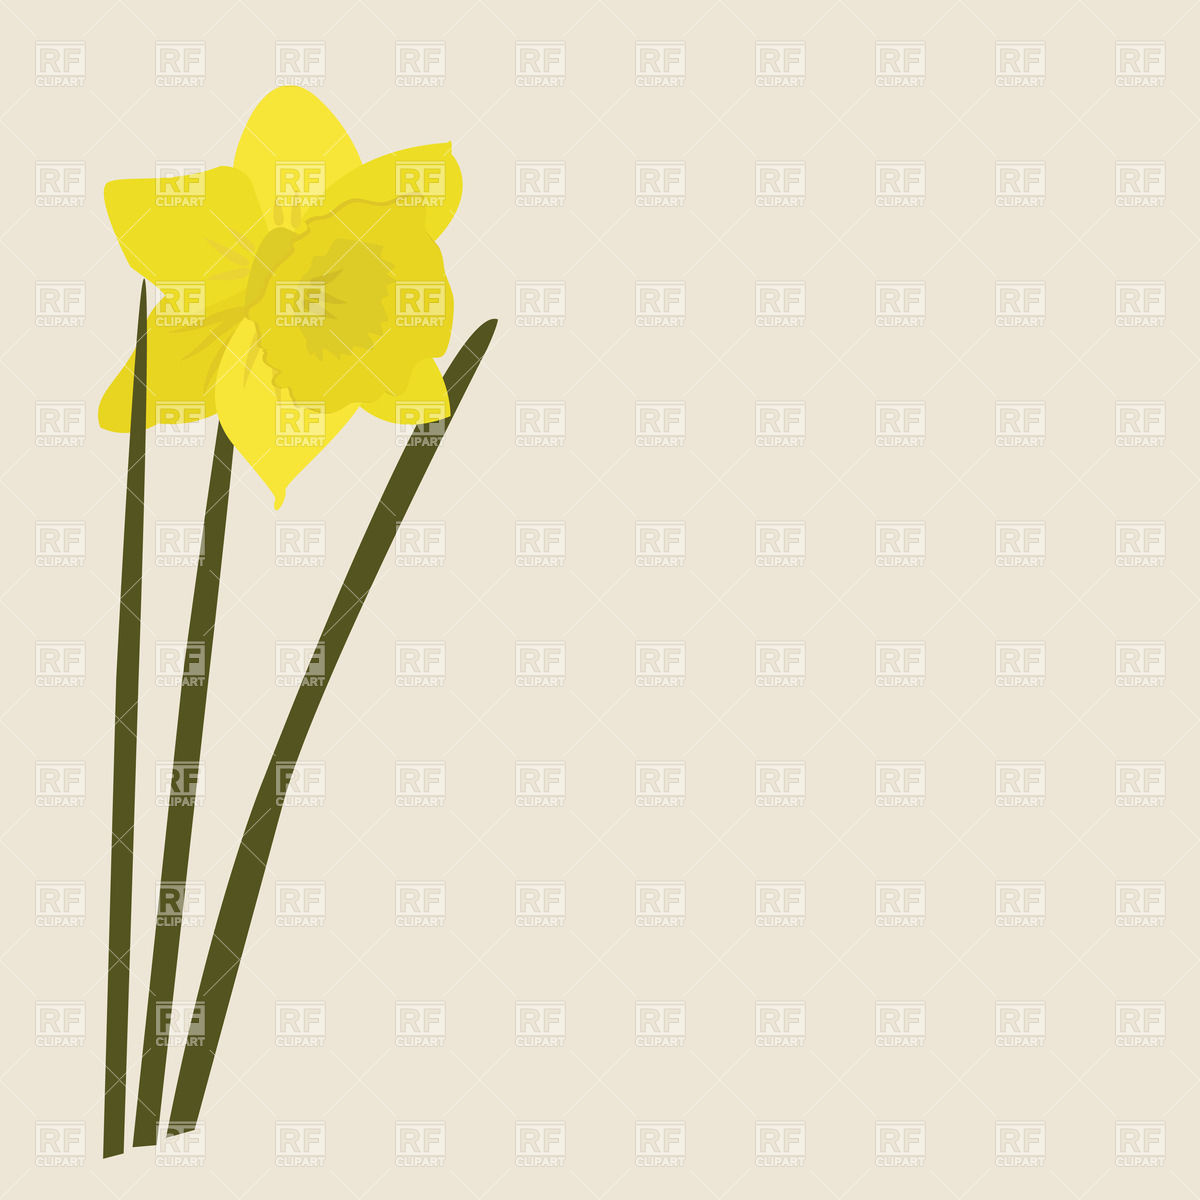 Daffodil   Yellow Narcissus Download Royalty Free Vector Clipart  Eps    